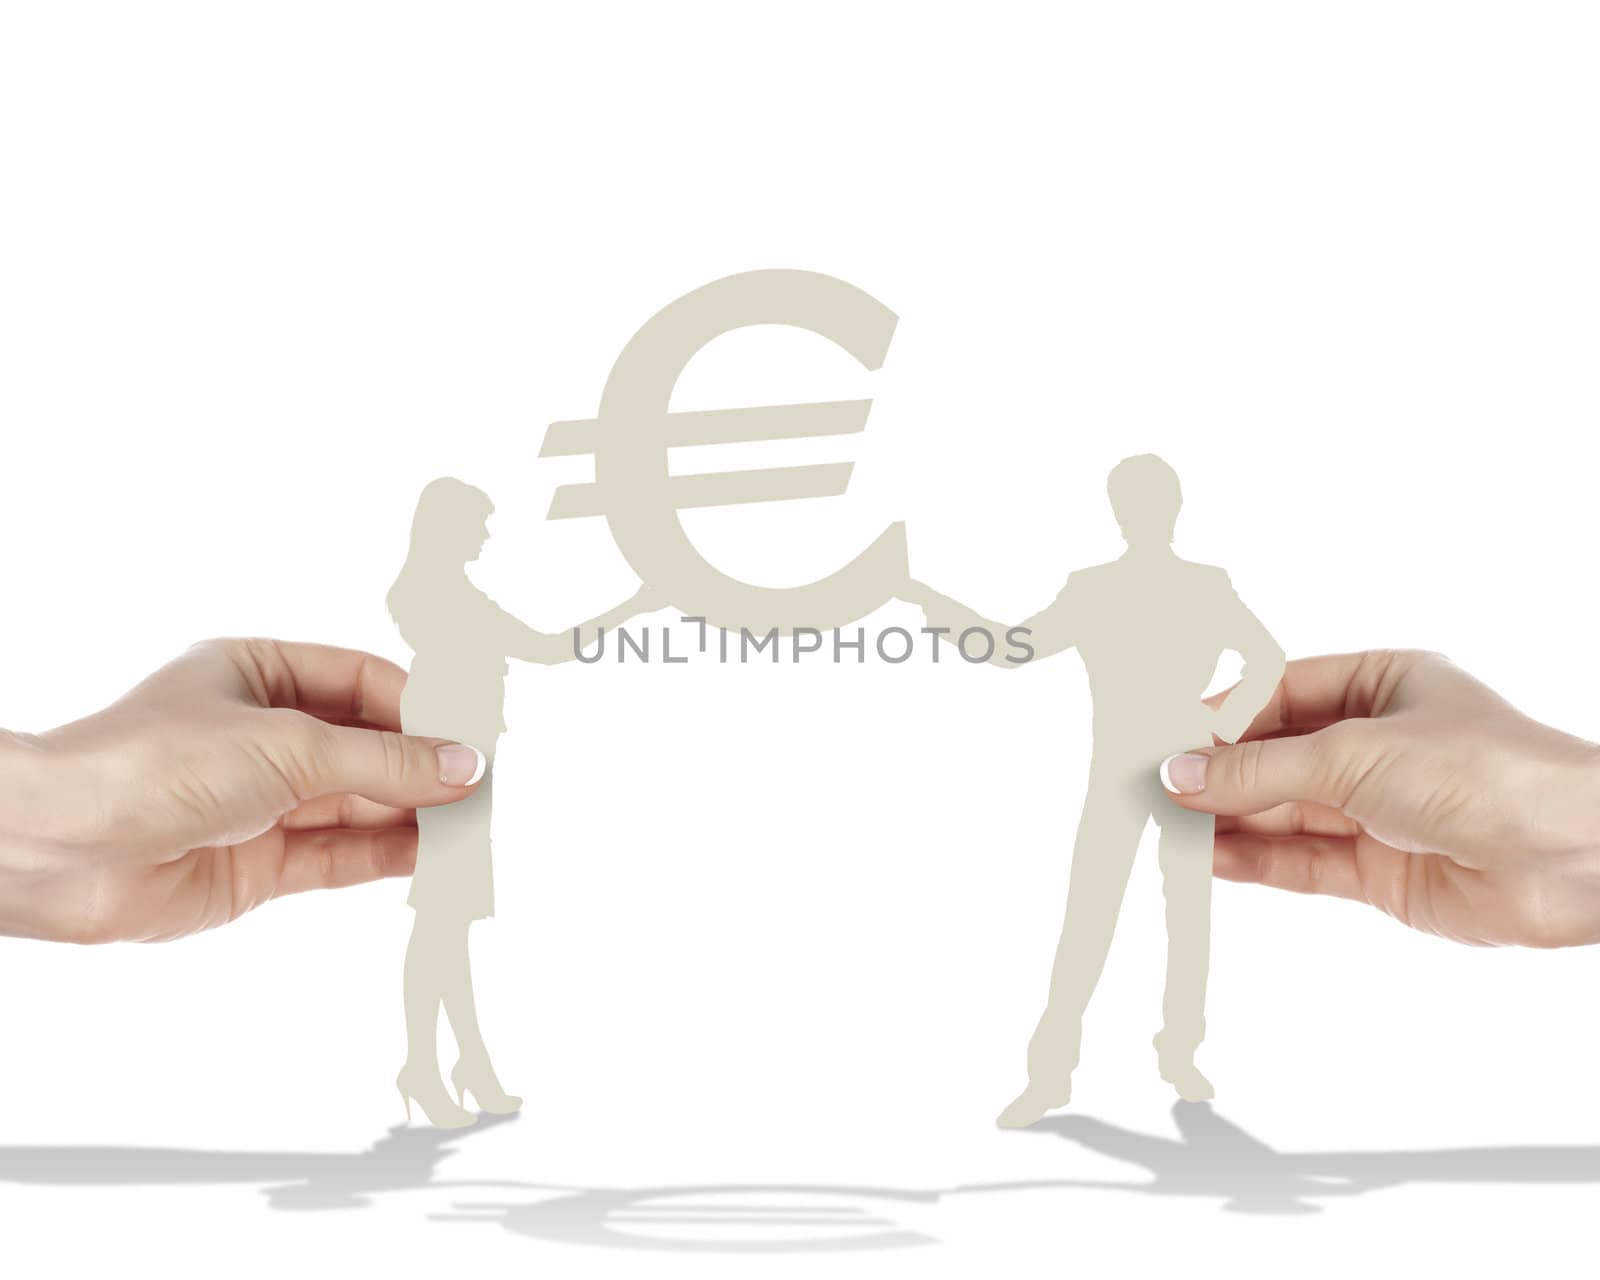 Two human figures holding a currence mark